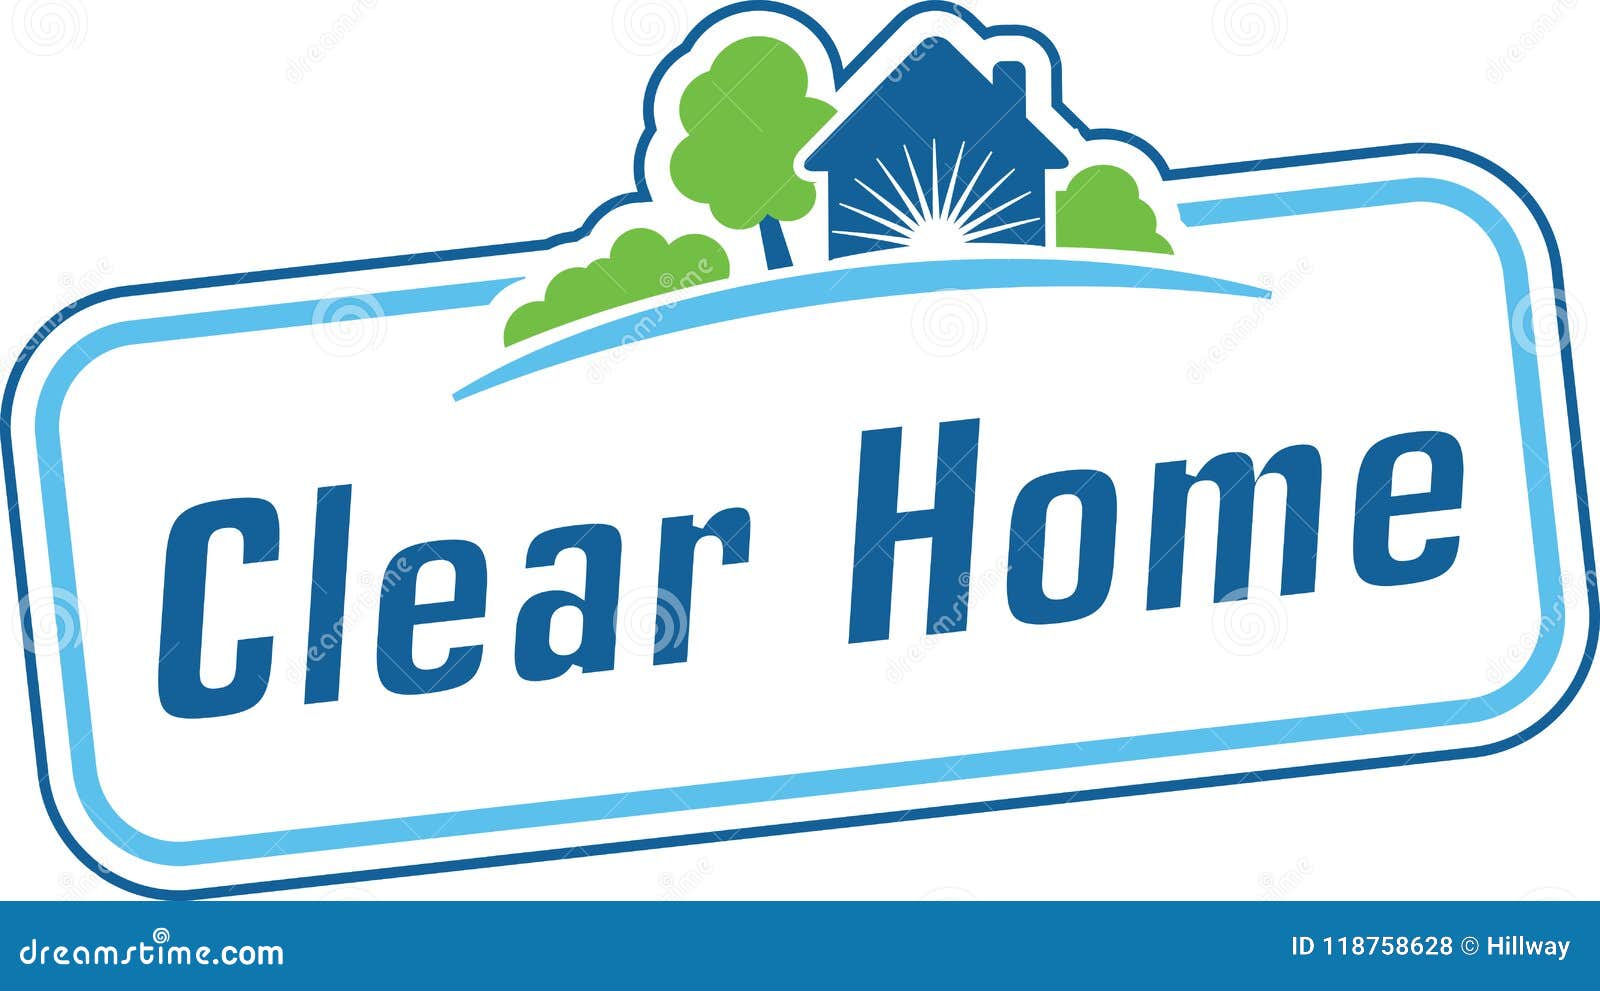 Clear home